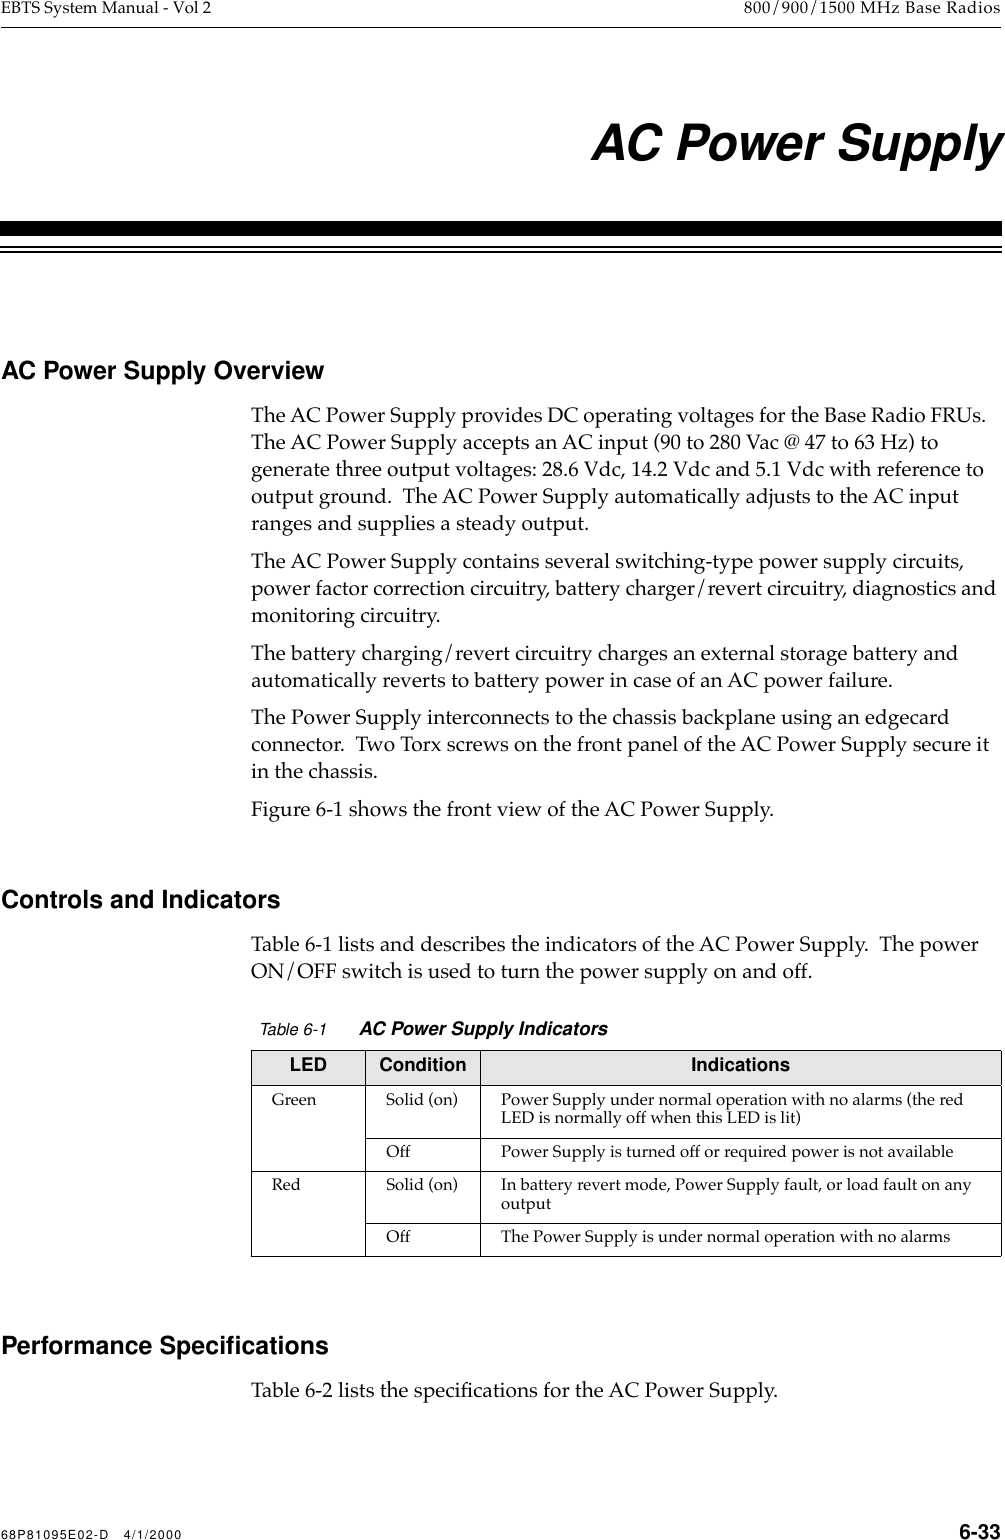  68P81095E02-D   4/1/2000 6-33 EBTS System Manual - Vol 2 800/900/1500 MHz Base Radios   6   AC Power Supply AC Power Supply Overview The AC Power Supply provides DC operating voltages for the Base Radio FRUs.   The AC Power Supply accepts an AC input (90 to 280 Vac @ 47 to 63 Hz) to generate three output voltages: 28.6 Vdc, 14.2 Vdc and 5.1 Vdc with reference to output ground.  The AC Power Supply automatically adjusts to the AC input ranges and supplies a steady output.The AC Power Supply contains several switching-type power supply circuits, power factor correction circuitry, battery charger/revert circuitry, diagnostics and monitoring circuitry. The battery charging/revert circuitry charges an external storage battery and automatically reverts to battery power in case of an AC power failure. The Power Supply interconnects to the chassis backplane using an edgecard connector.  Two Torx screws on the front panel of the AC Power Supply secure it in the chassis.Figure 6-1 shows the front view of the AC Power Supply. Controls and Indicators Table 6-1 lists and describes the indicators of the AC Power Supply.  The power ON/OFF switch is used to turn the power supply on and off.  Performance Speciﬁcations Table 6-2 lists the speciÞcations for the AC Power Supply. Table 6-1 AC Power Supply Indicators LED Condition Indications Green Solid (on) Power Supply under normal operation with no alarms (the red LED is normally off when this LED is lit)Off Power Supply is turned off or required power is not availableRed Solid (on) In battery revert mode, Power Supply fault, or load fault on any outputOff The Power Supply is under normal operation with no alarms